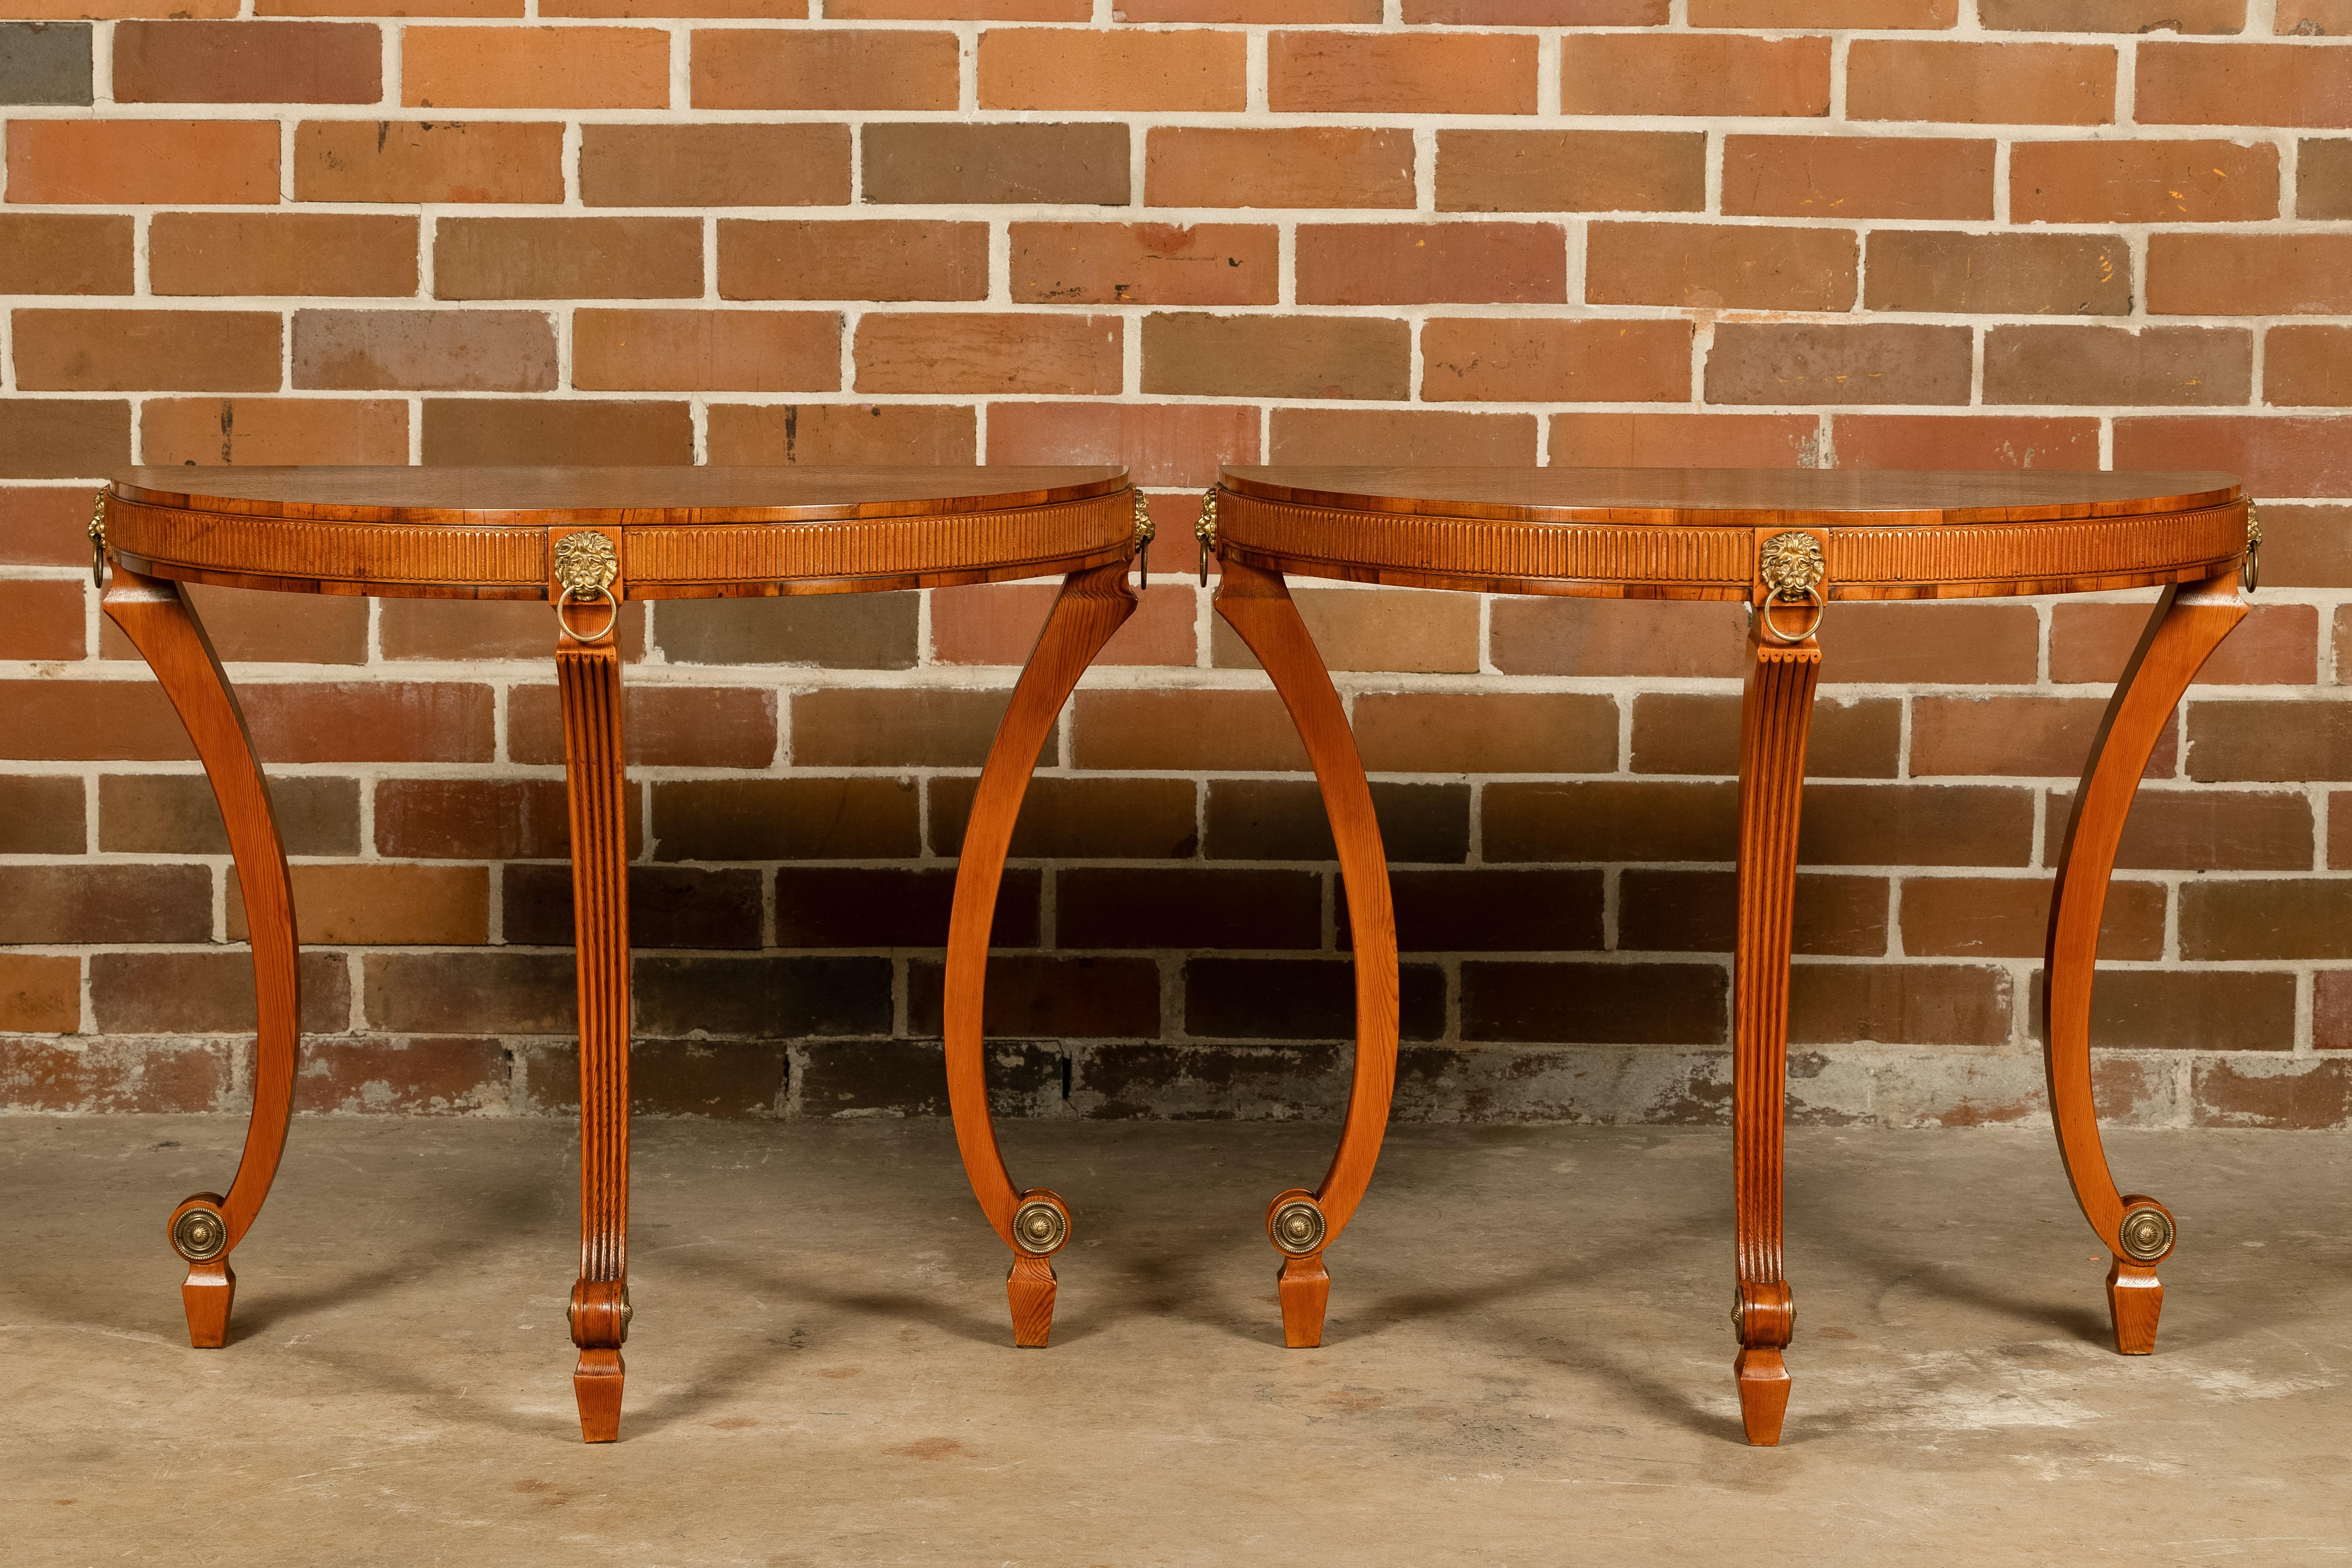 A pair of English Midcentury yew, pine and giltwood demi-lune console tables from circa 1960 with radiating veneered top, lion head ring pulls, fluted legs and apron, as well as scrolling feet. This pair of English Midcentury console tables, crafted